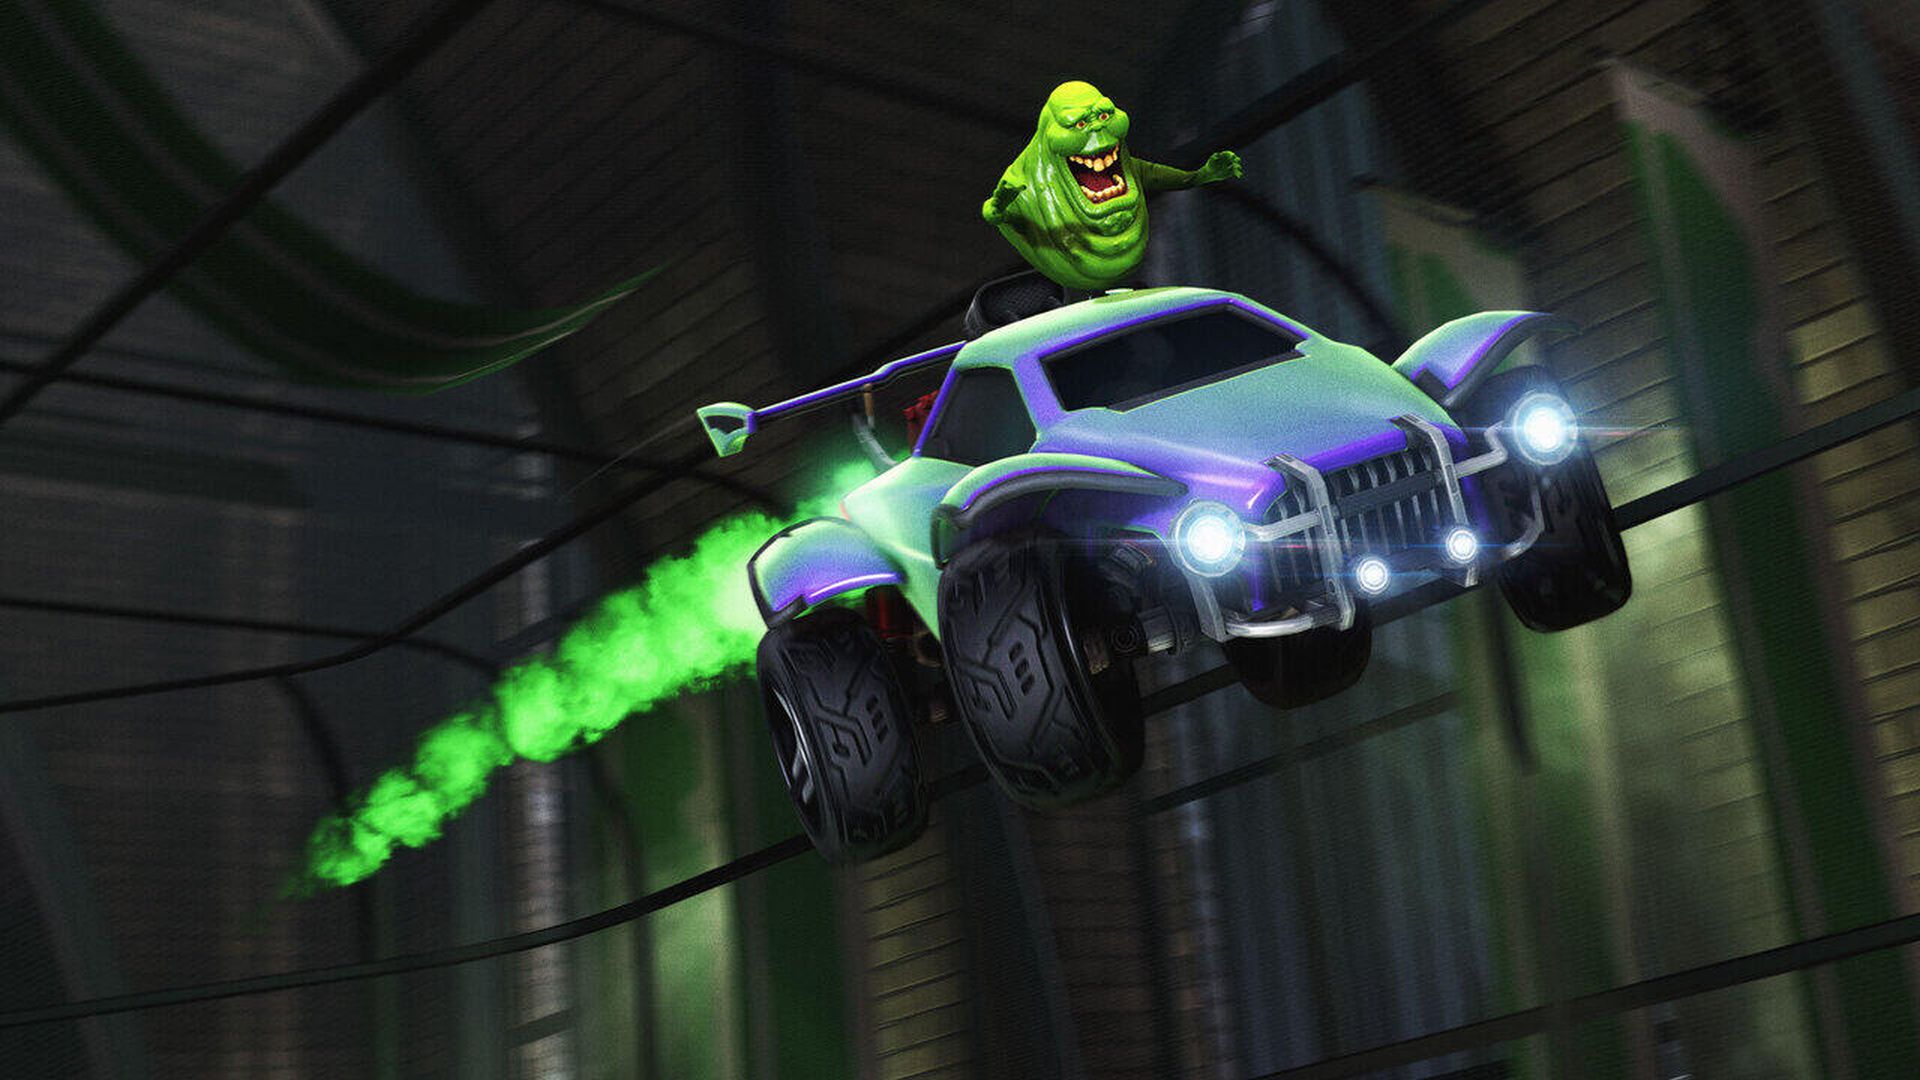 Rocket League Haunted Hallows brings the Ghostbusters back to the game